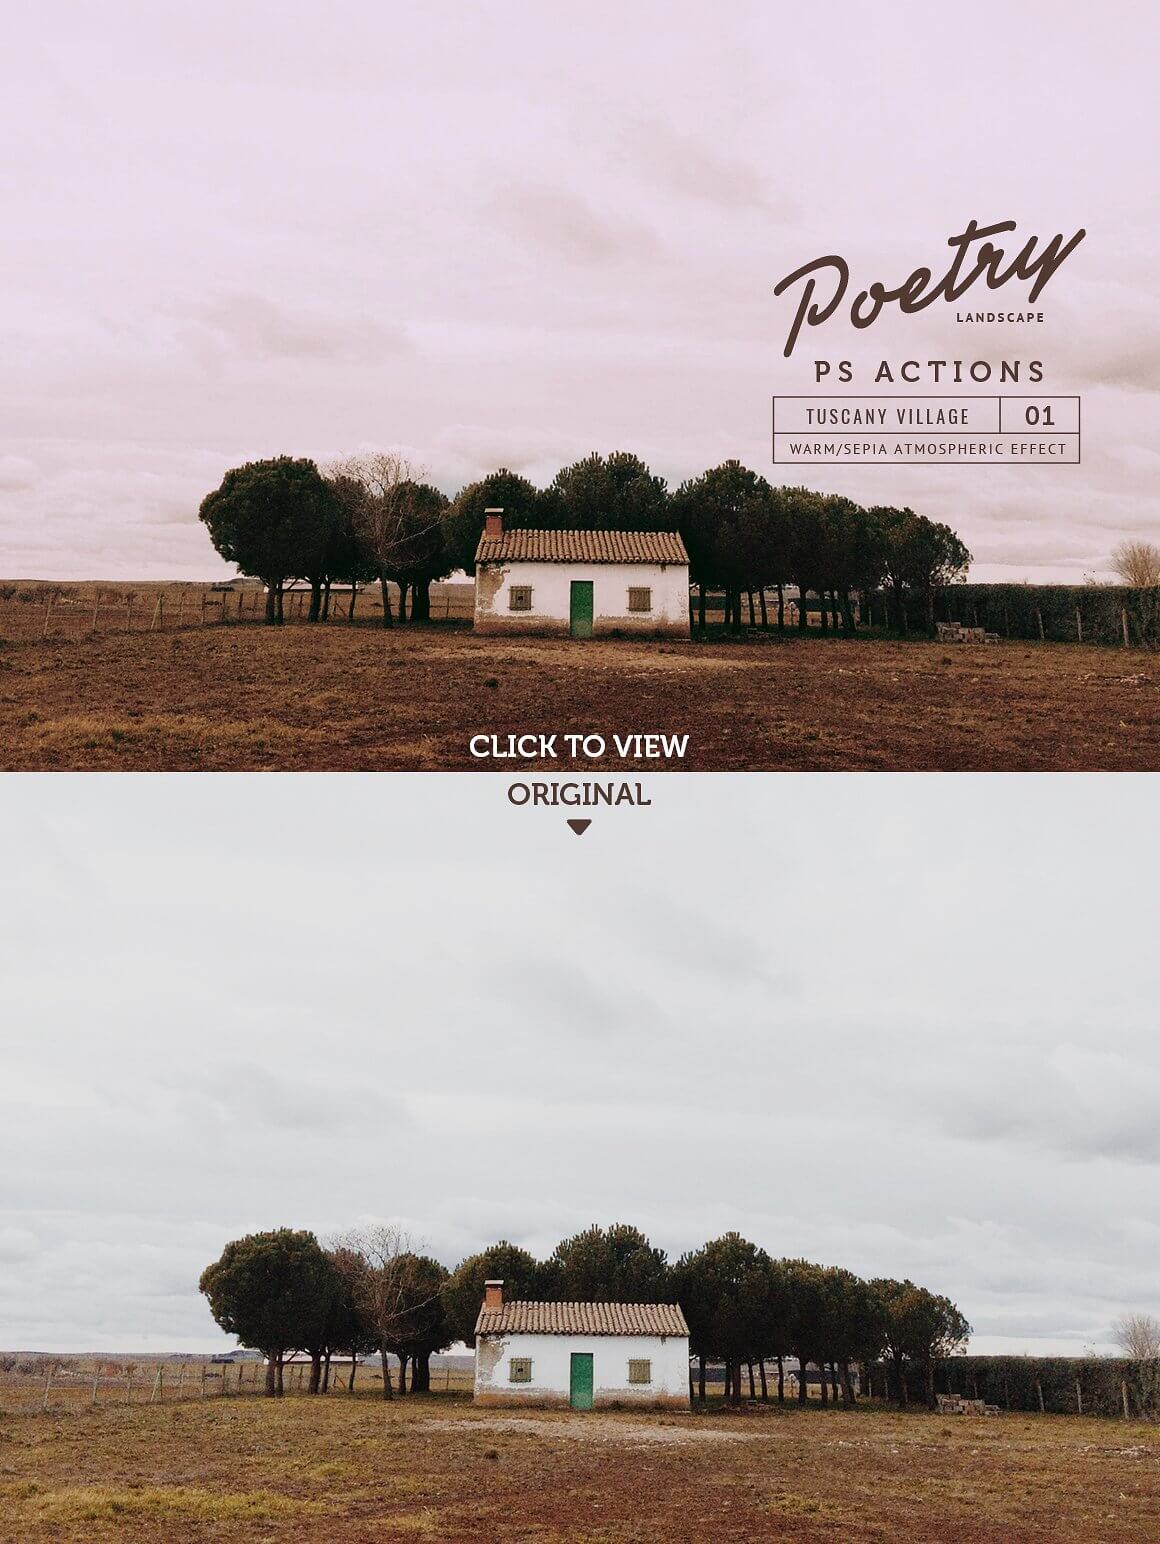 Poetry-Photoshop-Landscape-Actions 50+ Best Photoshop Actions of 2020 design tips Inspiration|actions|photoshop 